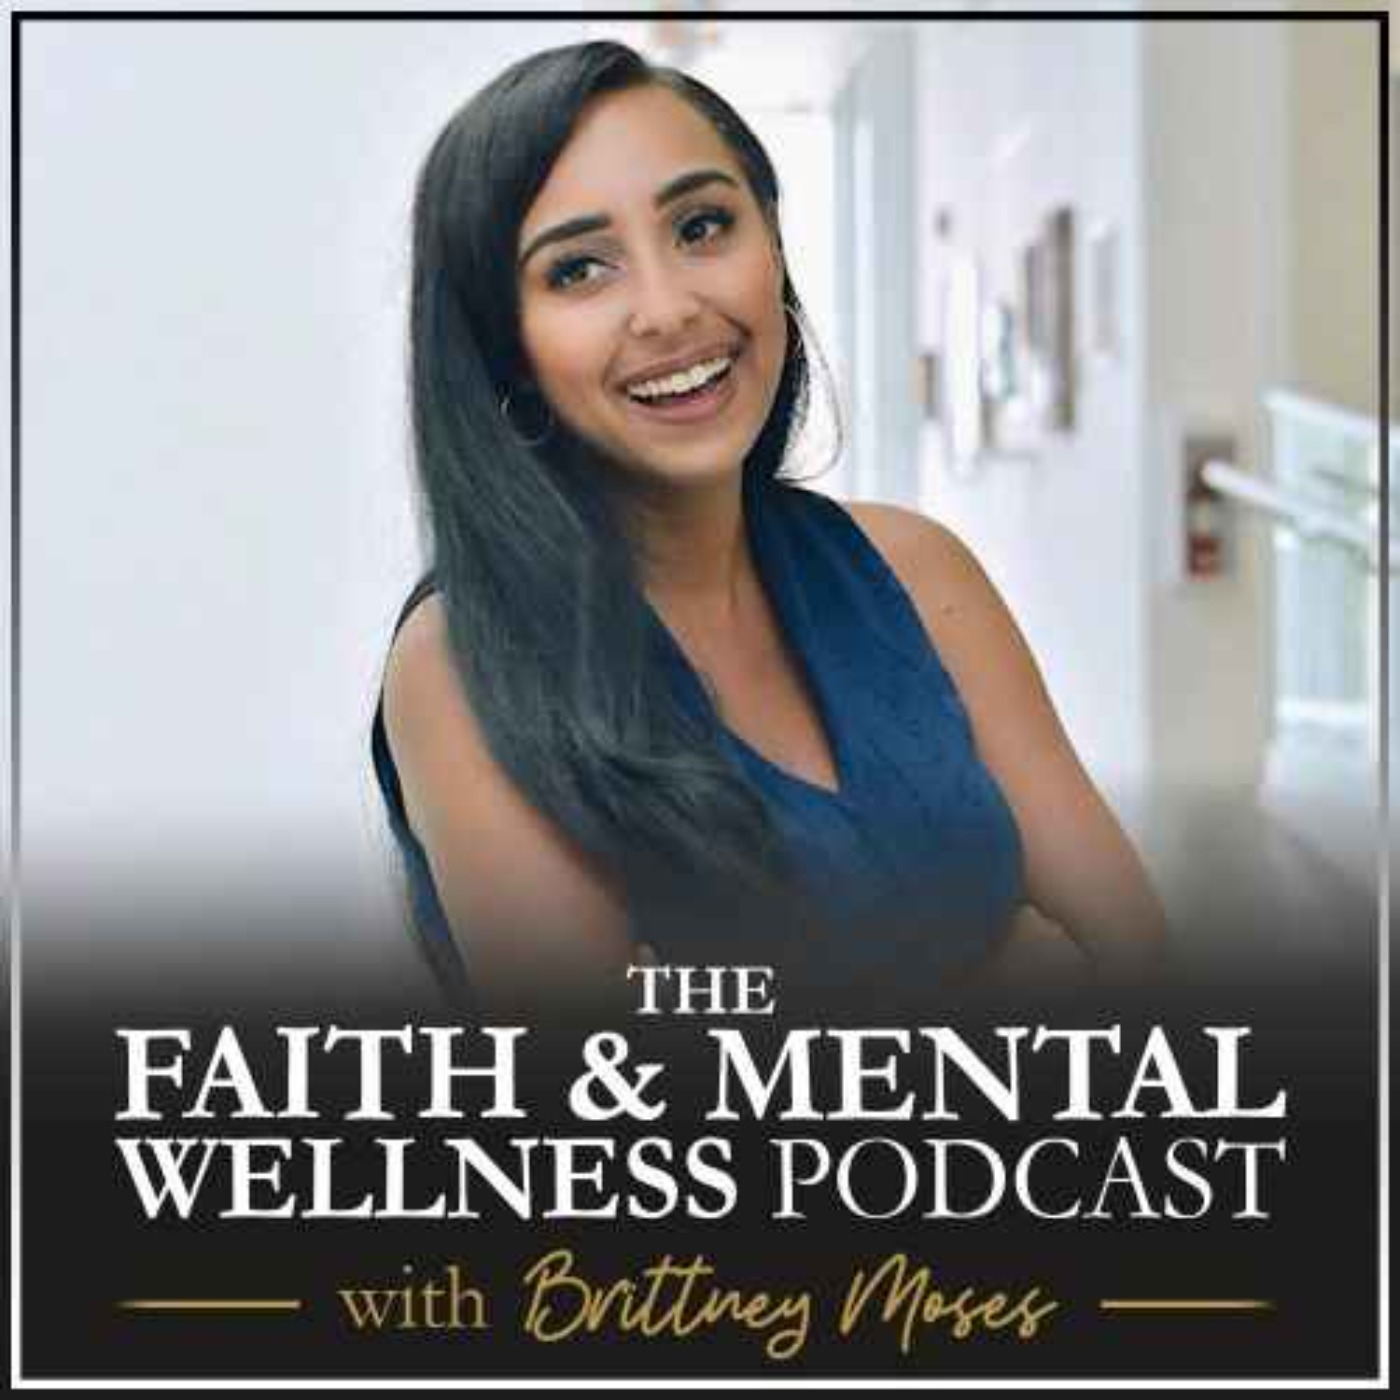 026: Staying Mentally Grounded & Refreshed During Covid19